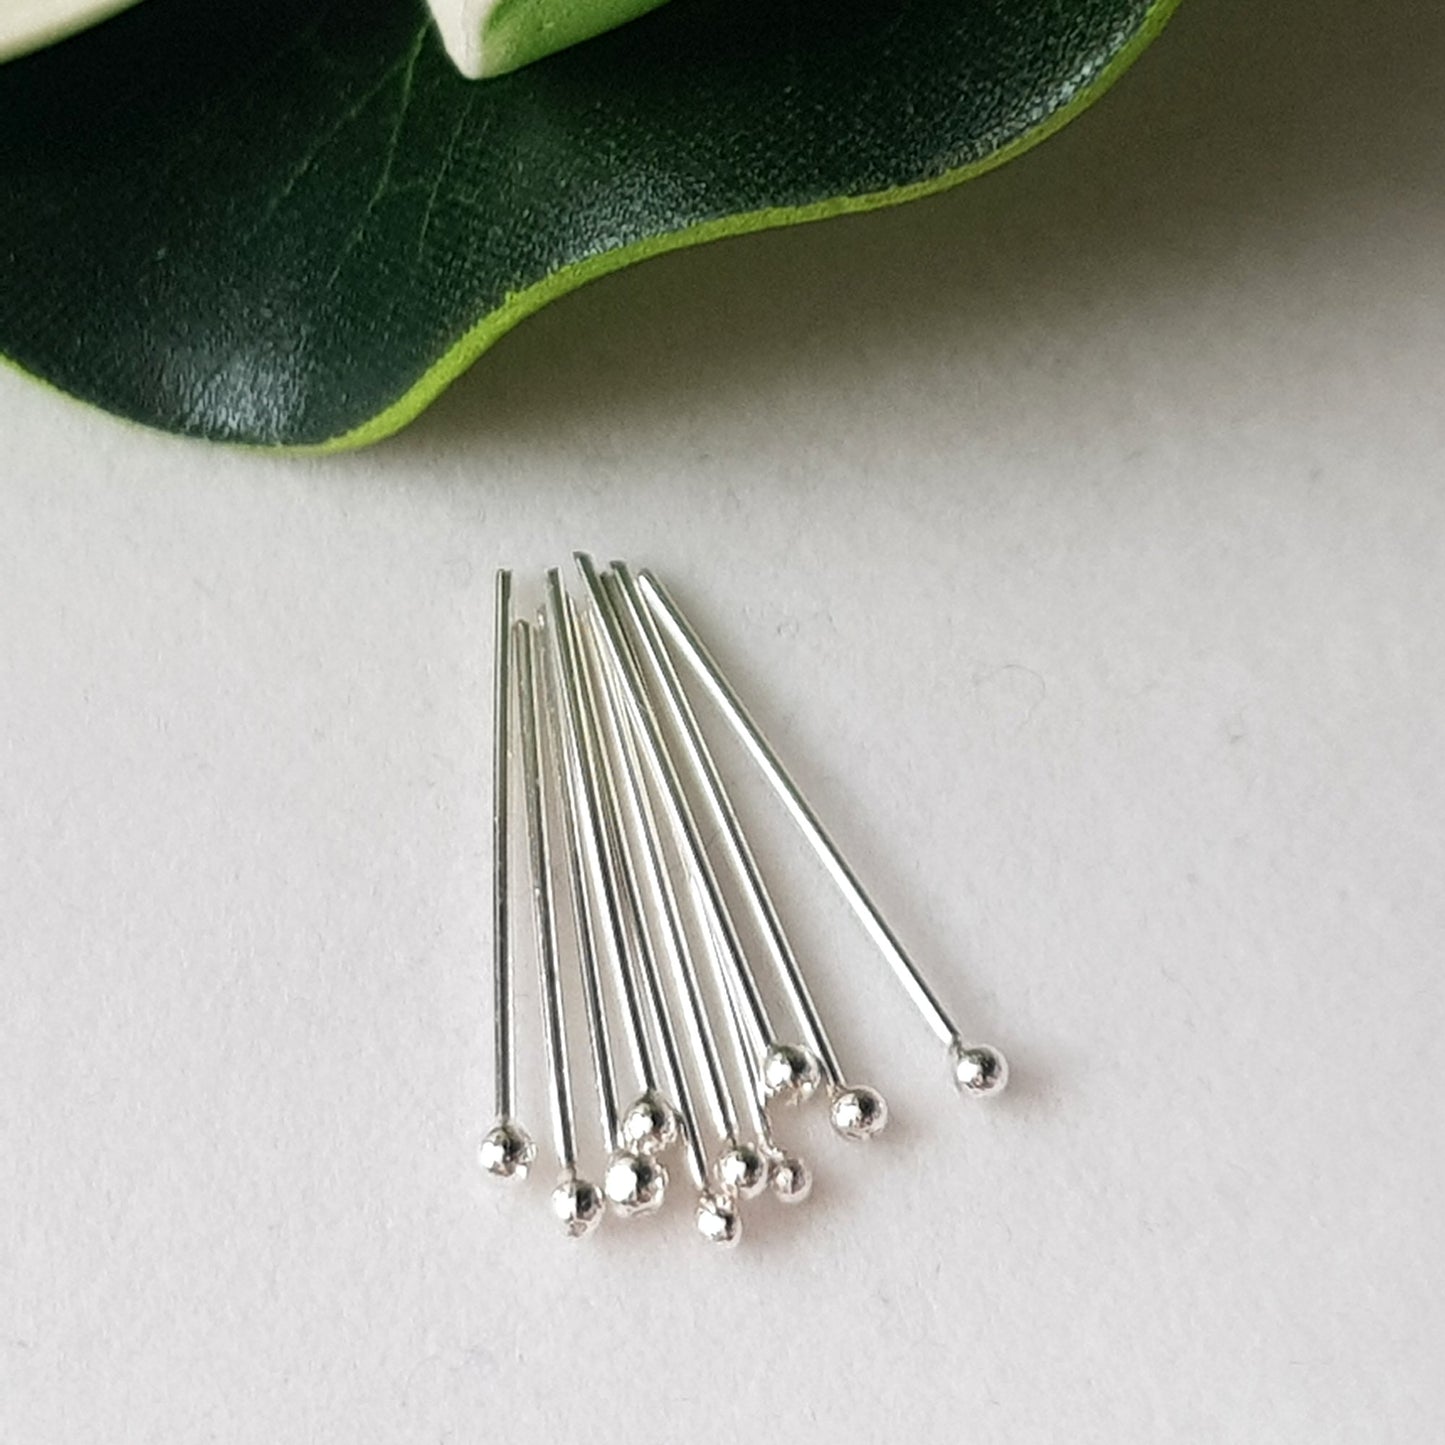 Headpins 20 mm (10pcs)- 21 gauge (0.7 mm) Sterling Silver | SS-GF720/10HP | Jewellery Making Supply - Kalitheo 